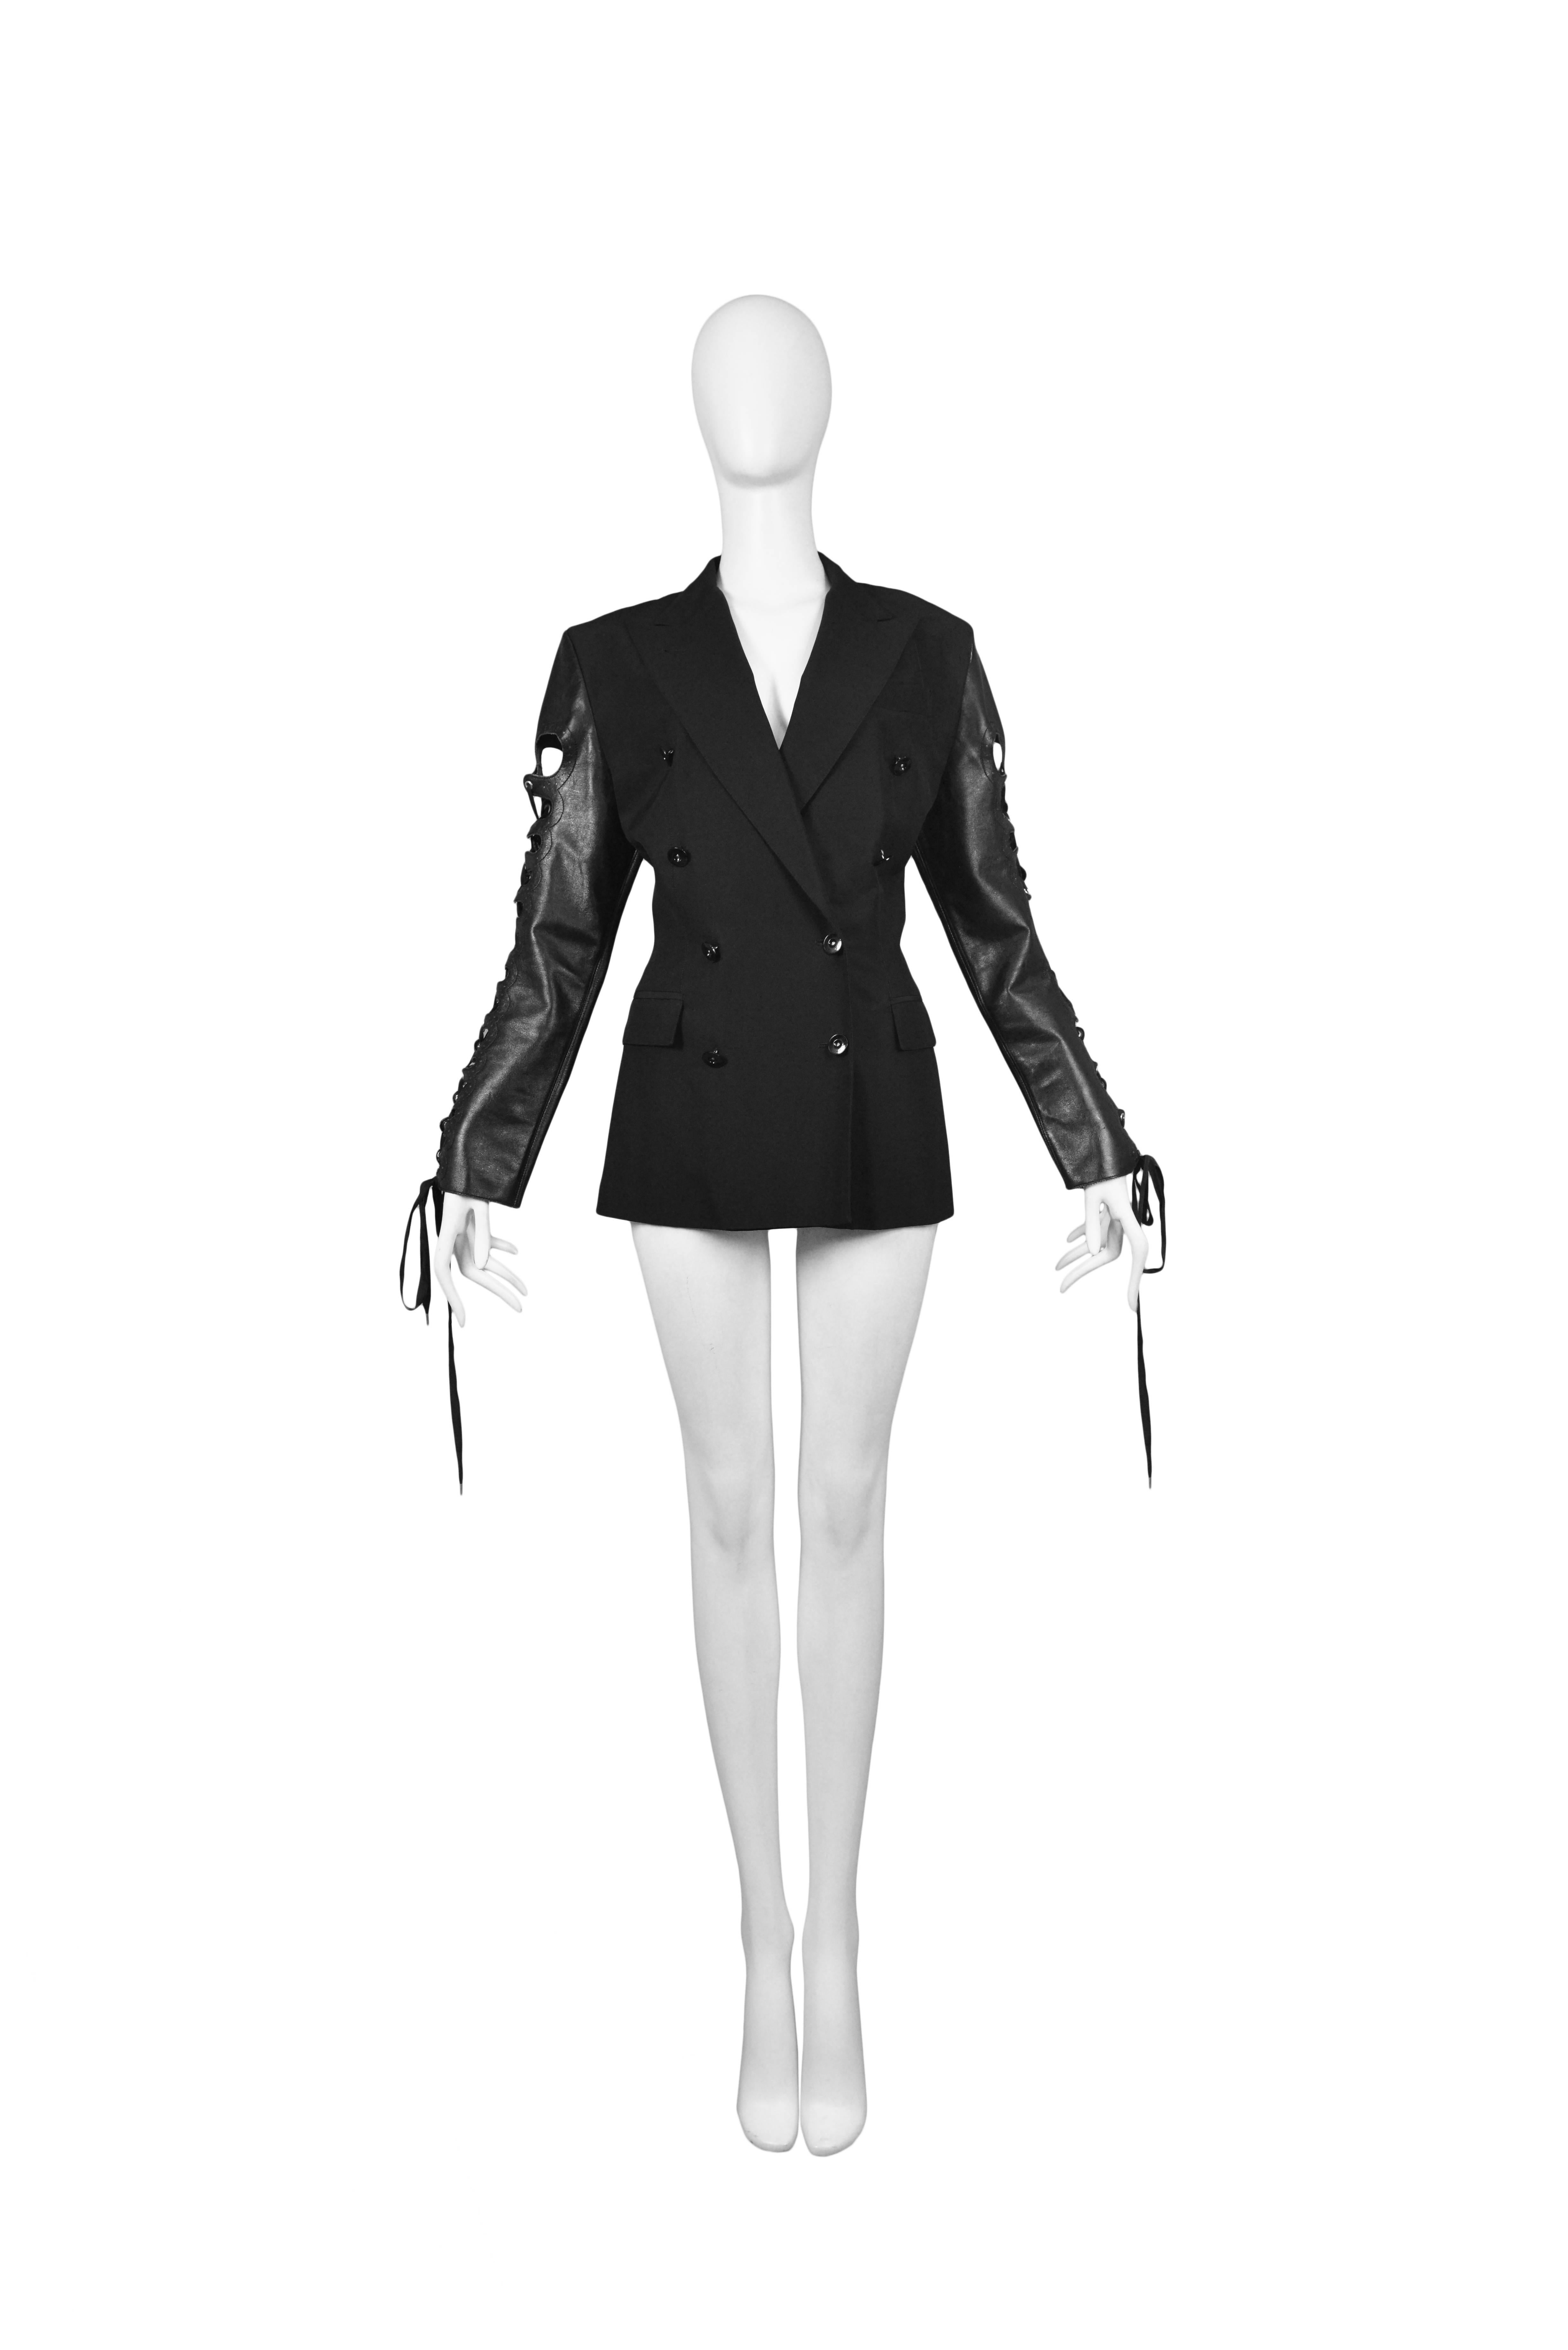 Vintage Jean Paul Gaultier black double breasted jacket featuring black leather sleeves that lace up both arms.
Please inquire for additional images.